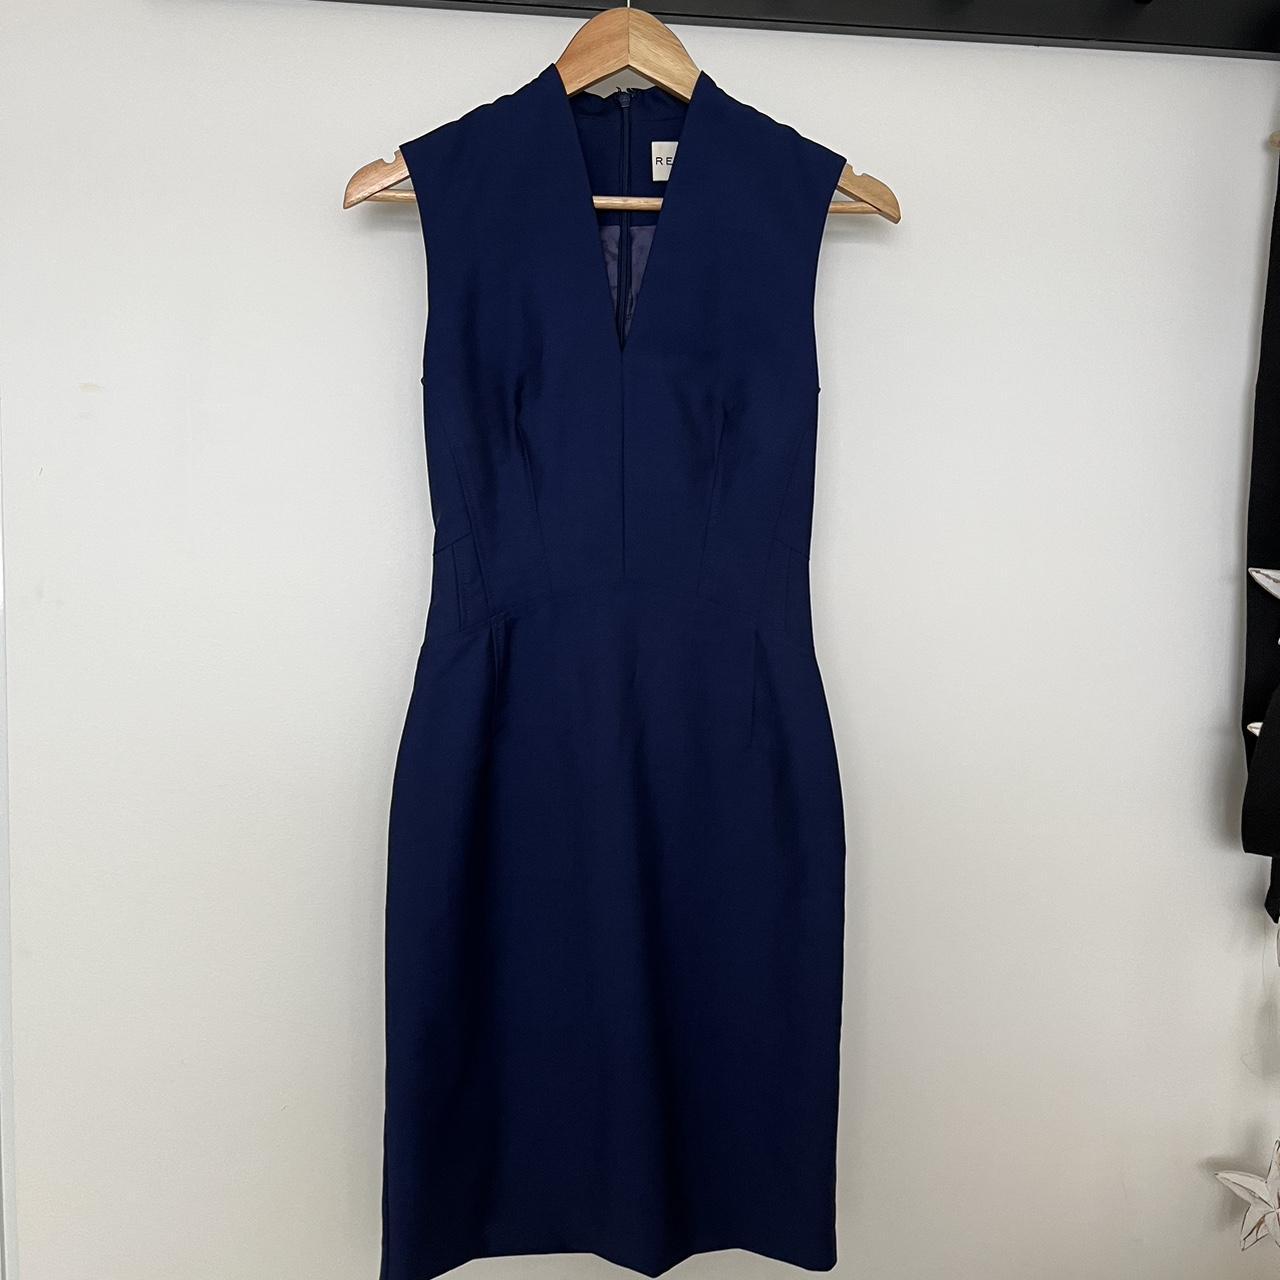 REISS dress excellent condition and quality. Size 6 - Depop